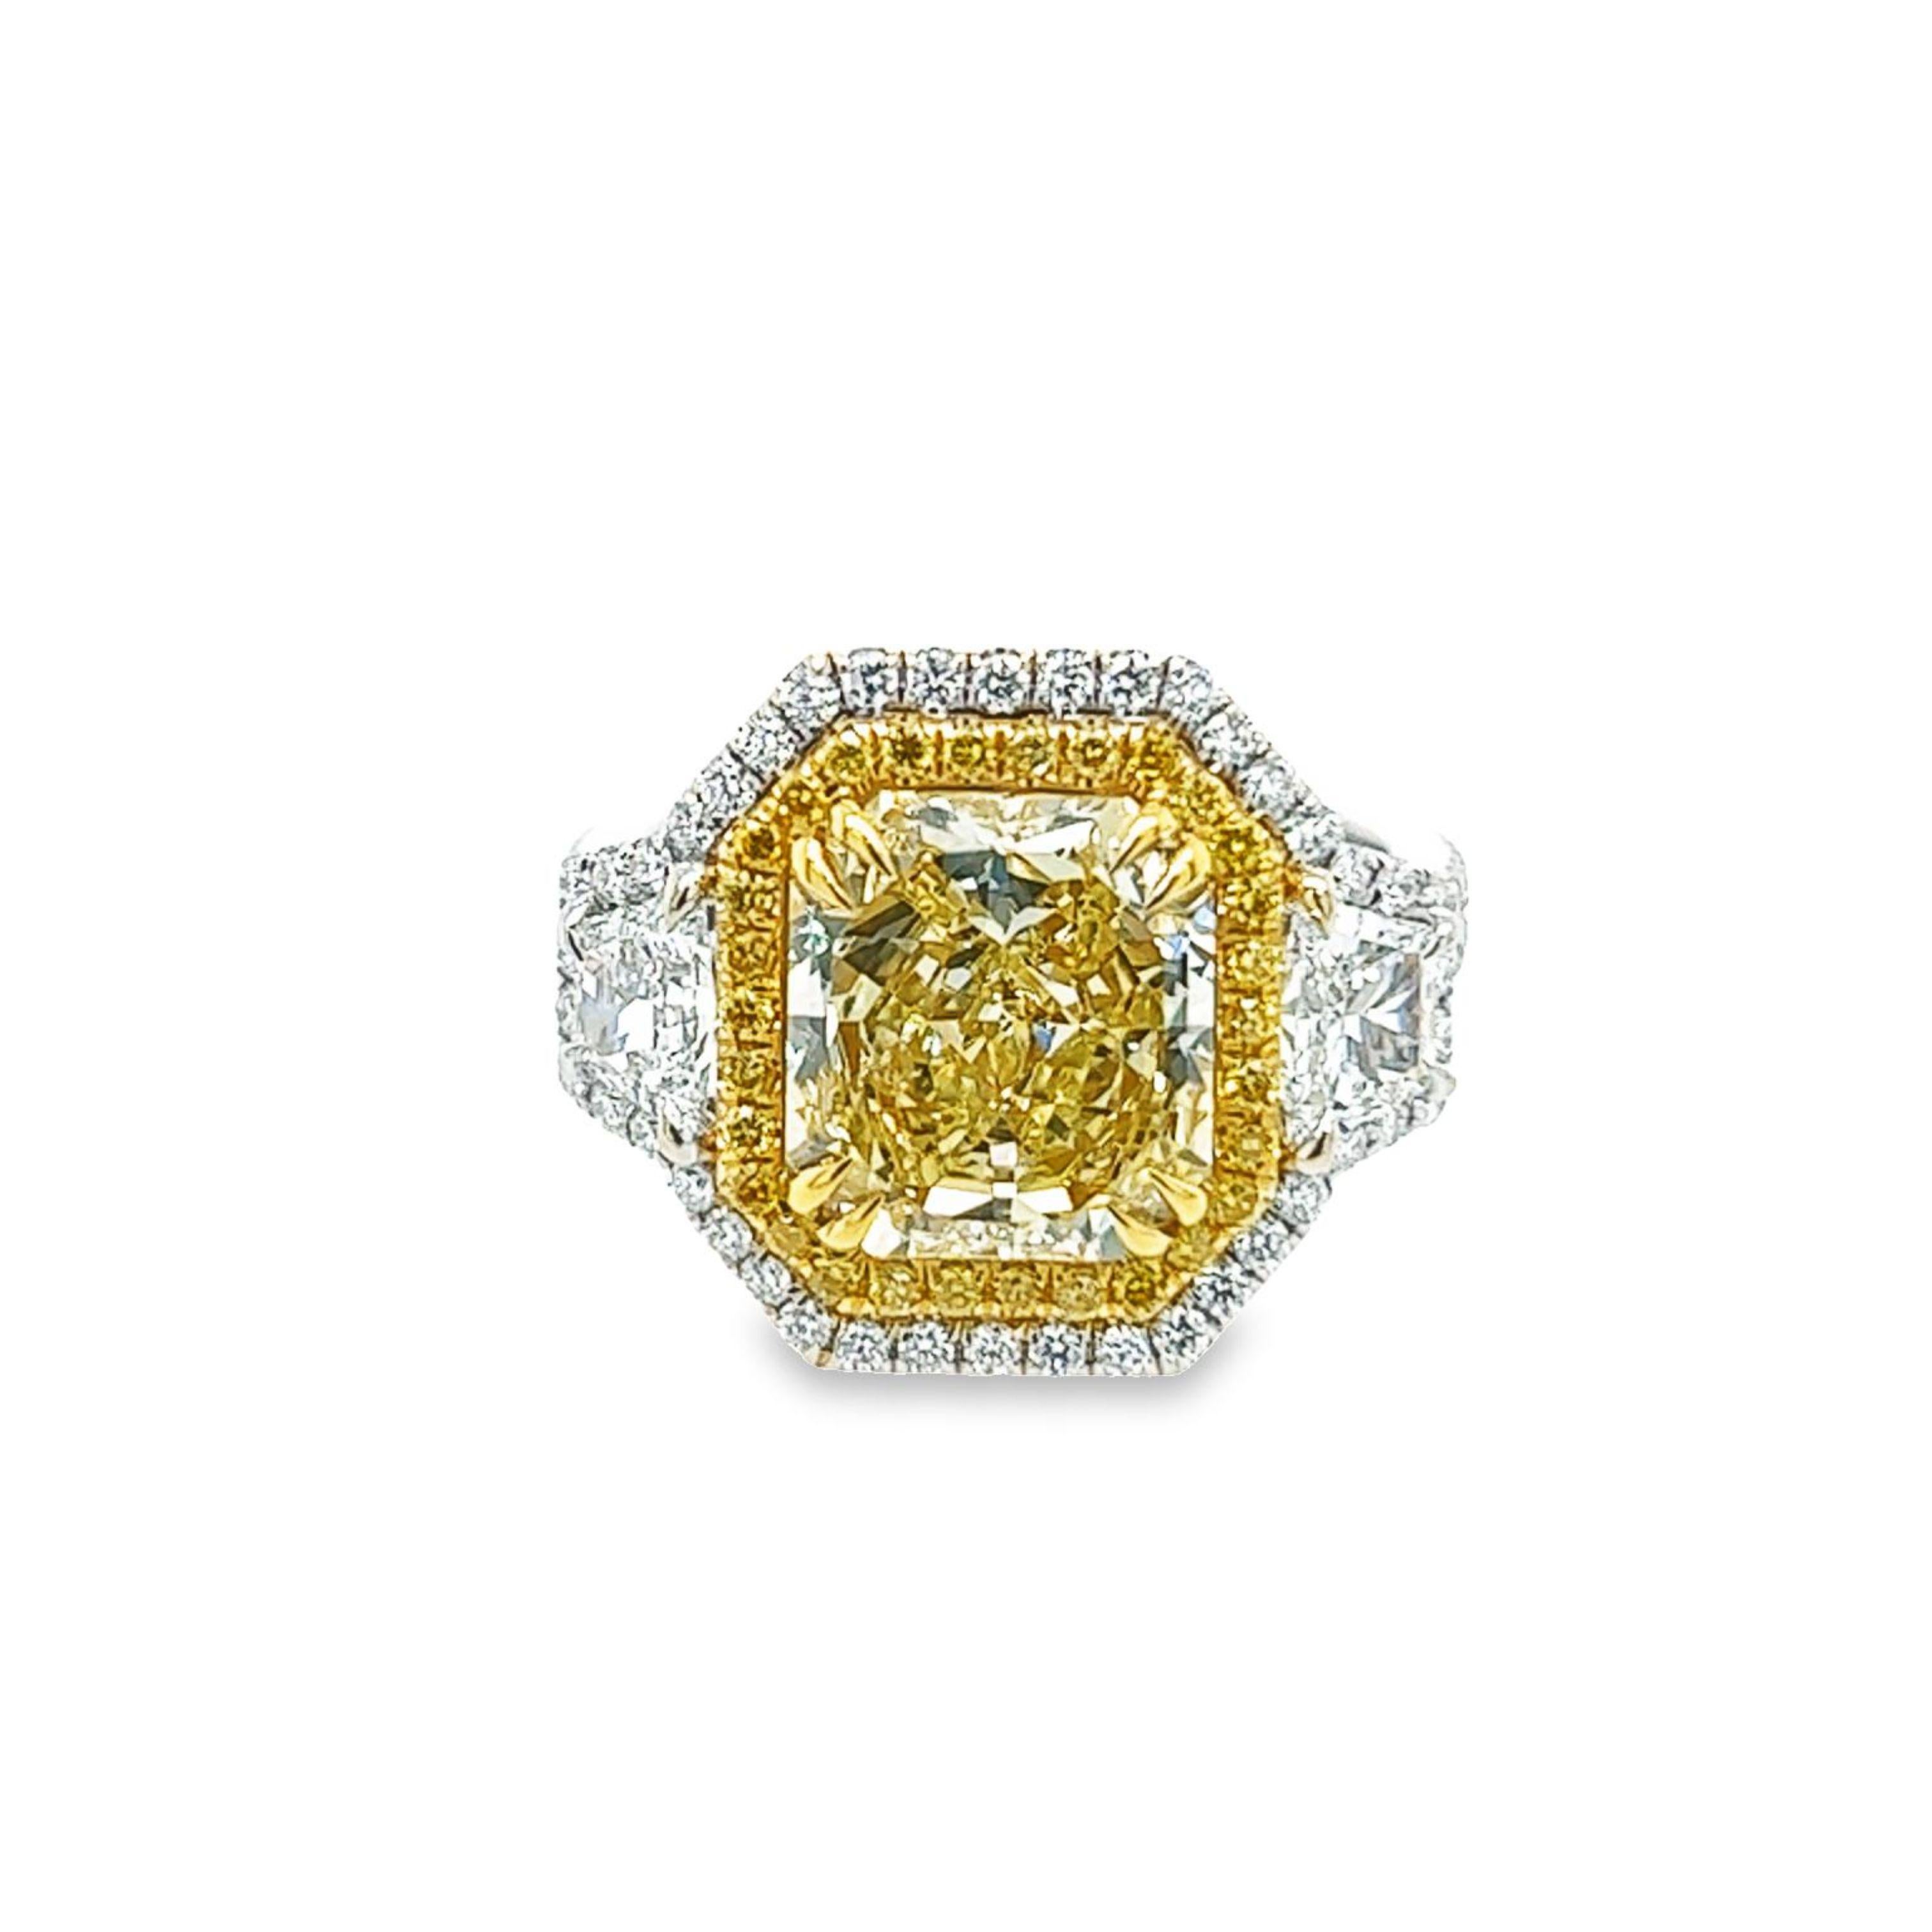 Rosenberg Diamonds & Co. 3.67 carat Radiant cut Fancy Yellow VVS2 clarity is accompanied by a GIA certificate. This beautiful bright Radiant cut is set in a 18k white & yellow gold setting with perfectly matched pair of trapezoid side stones